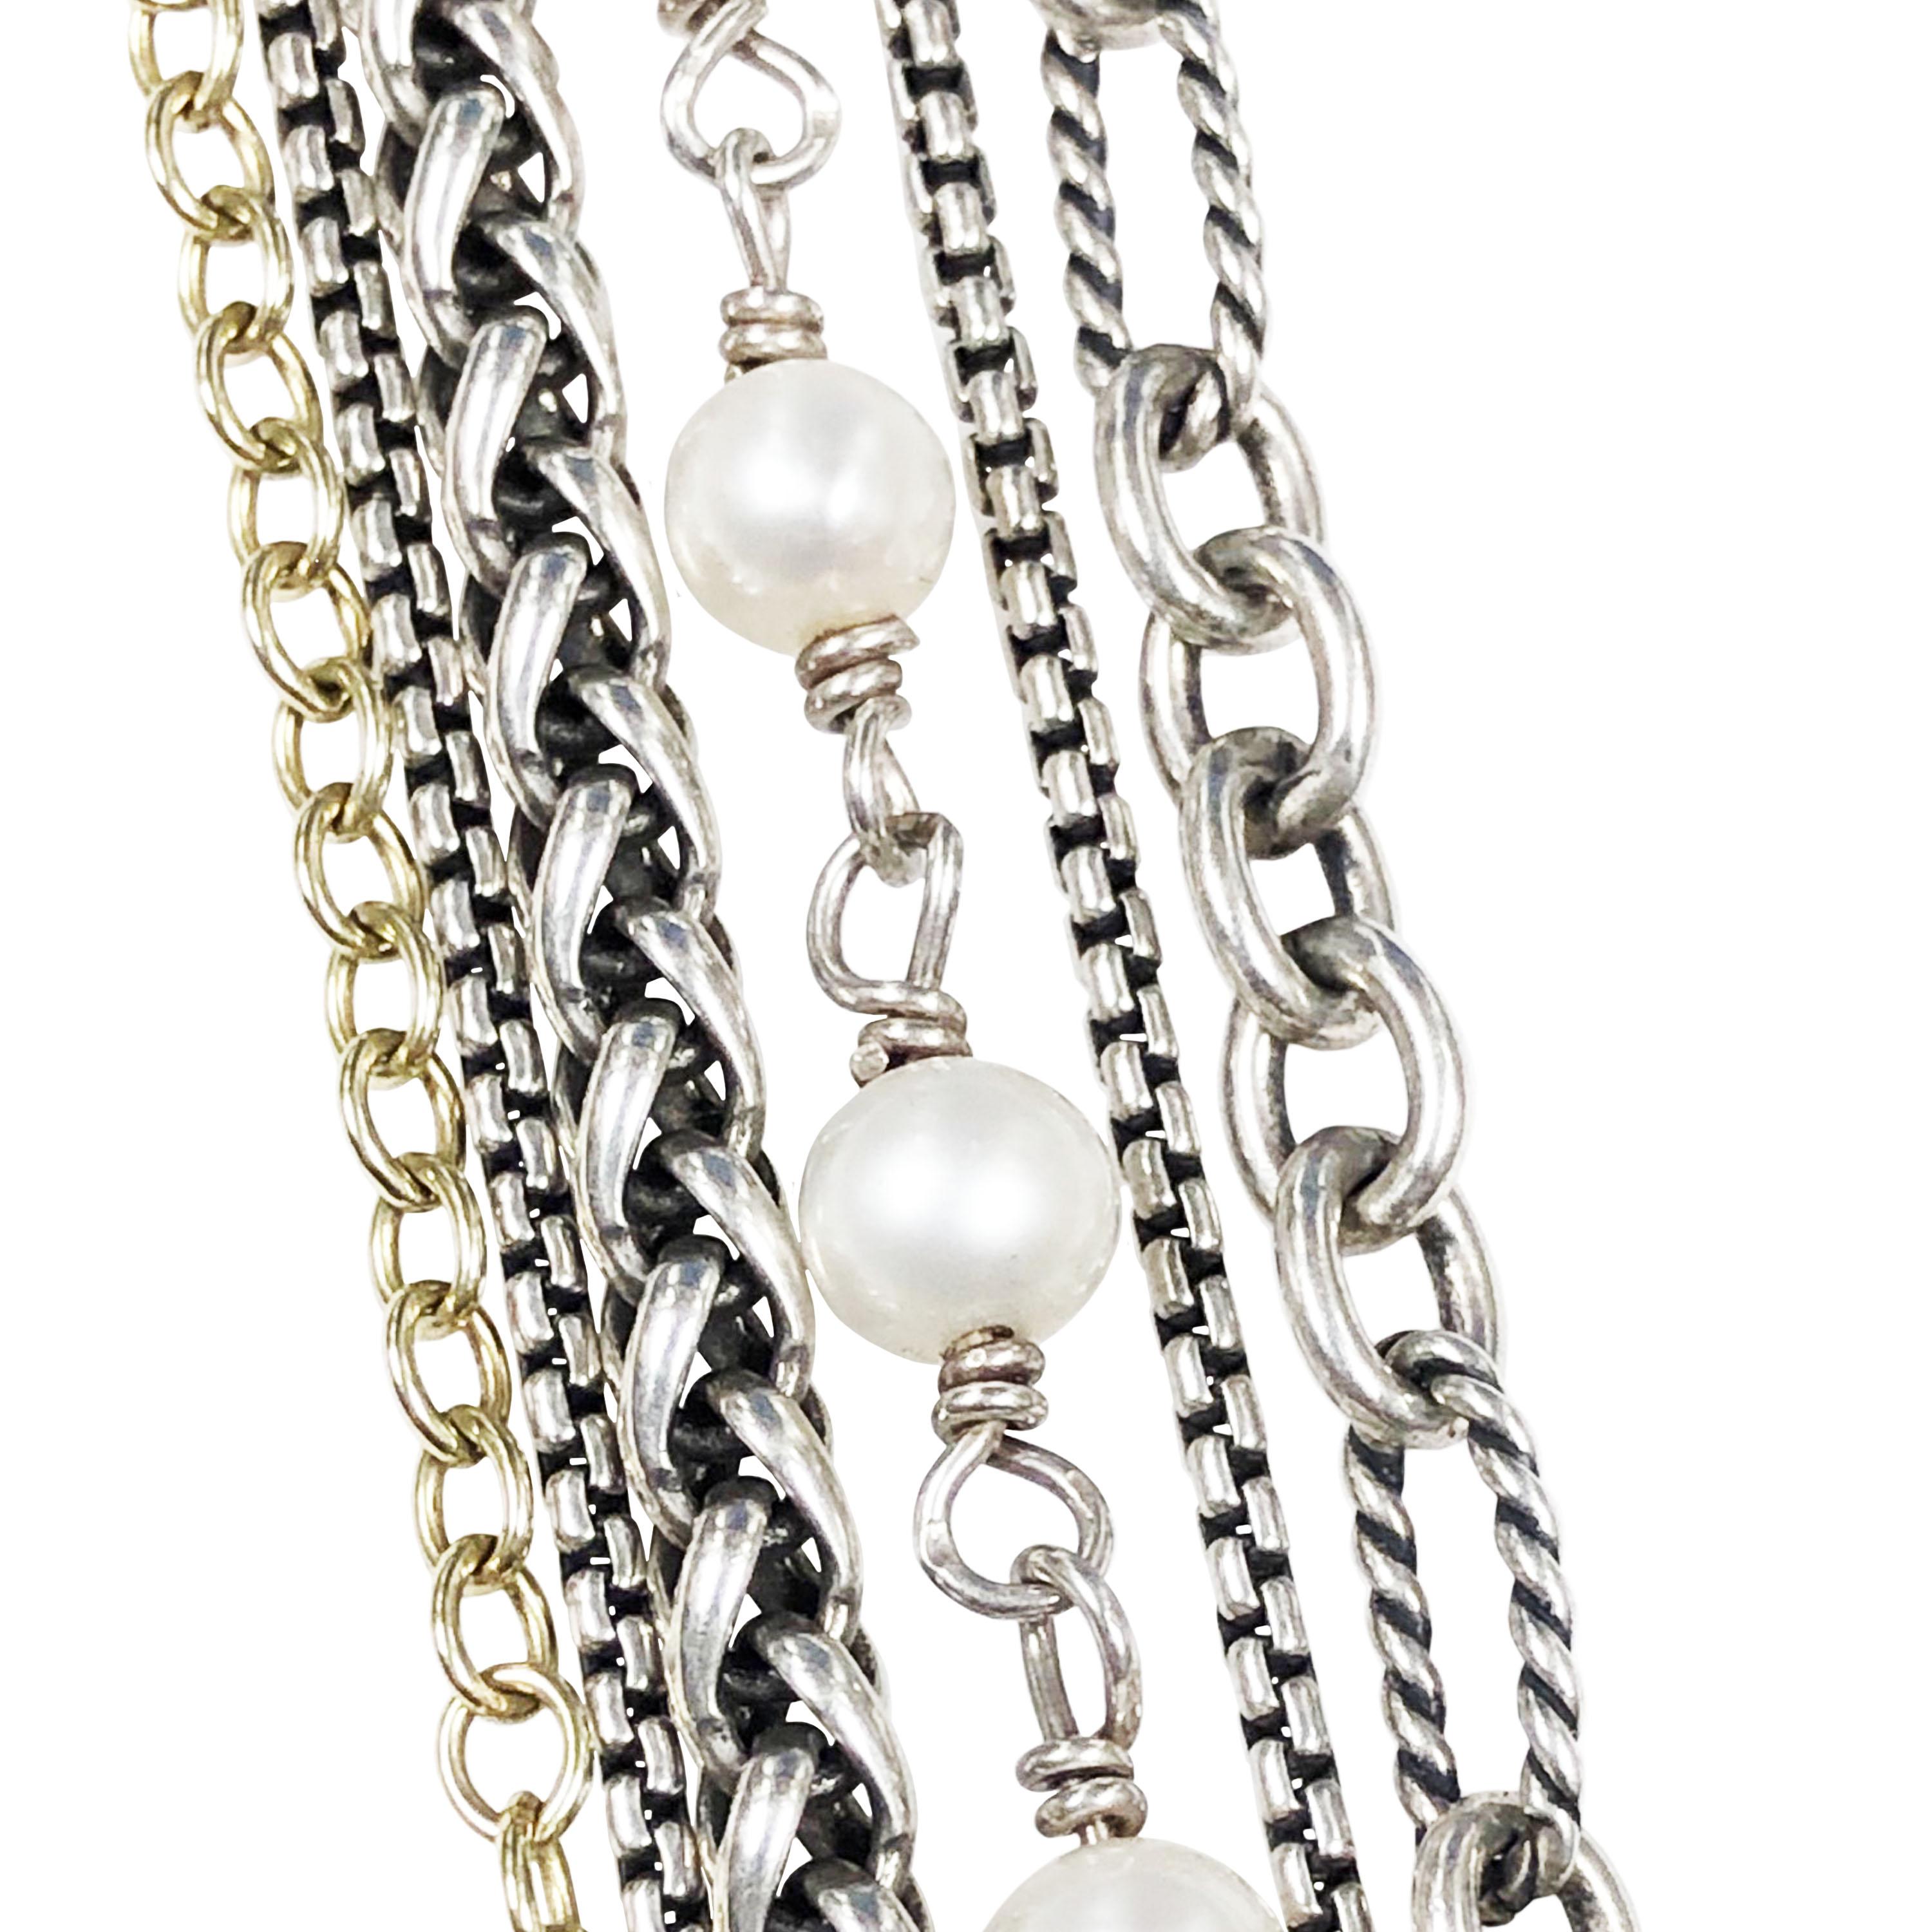 Circa 2010 David Yurman Multi Strand Necklace comprising several different link chain styles in Sterling Silver, Yellow Gold and 5 MM Round Cultured Pearls. Measuring 16 Inches in Length.